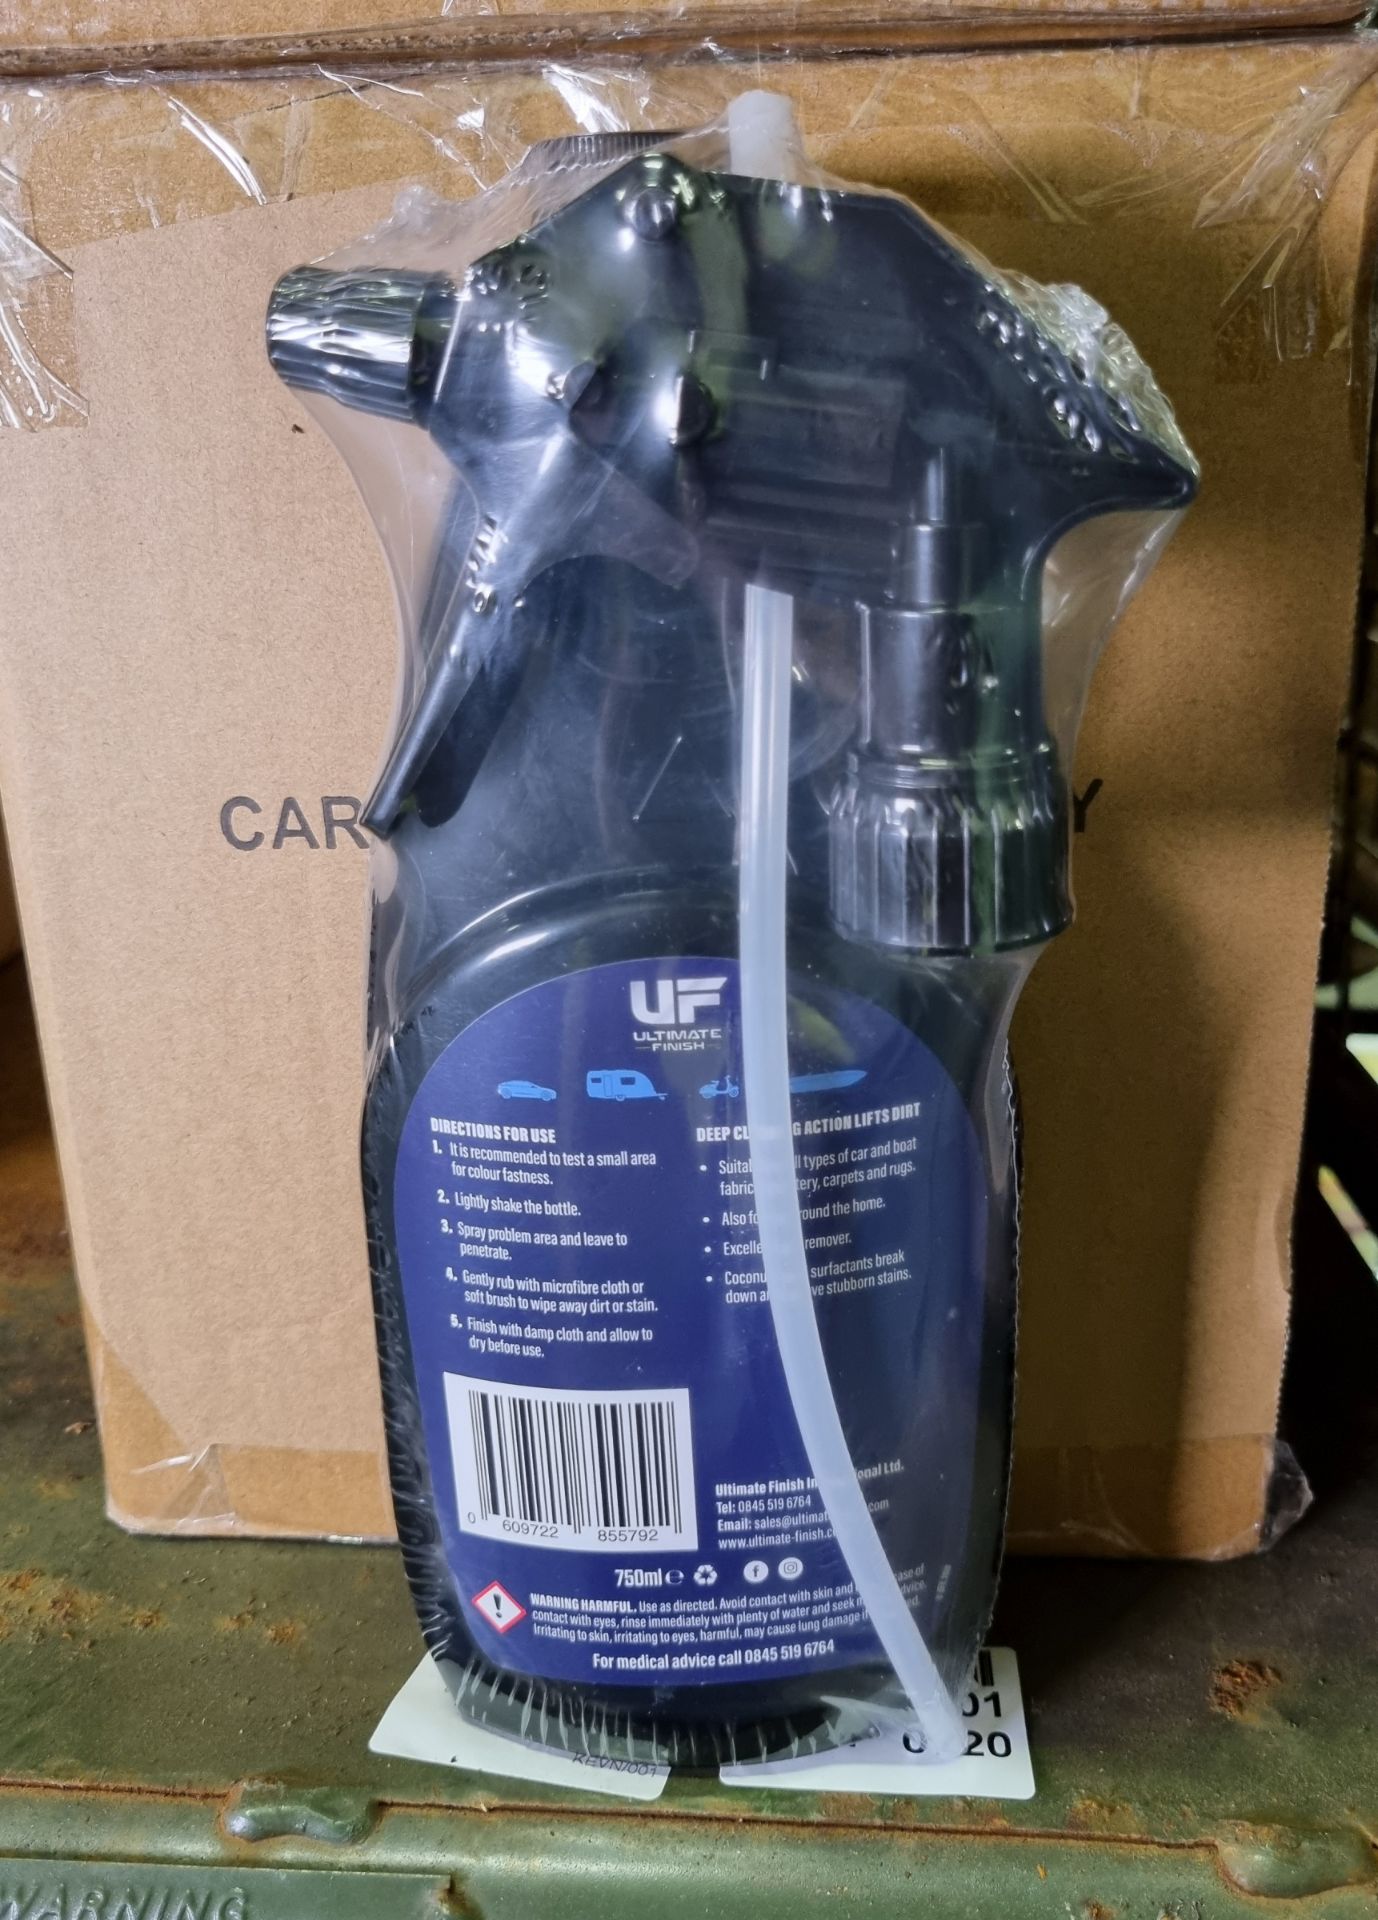 56x bottles of Ultimate Finish carpet and upholstery cleaner - 750ml - Image 6 of 7